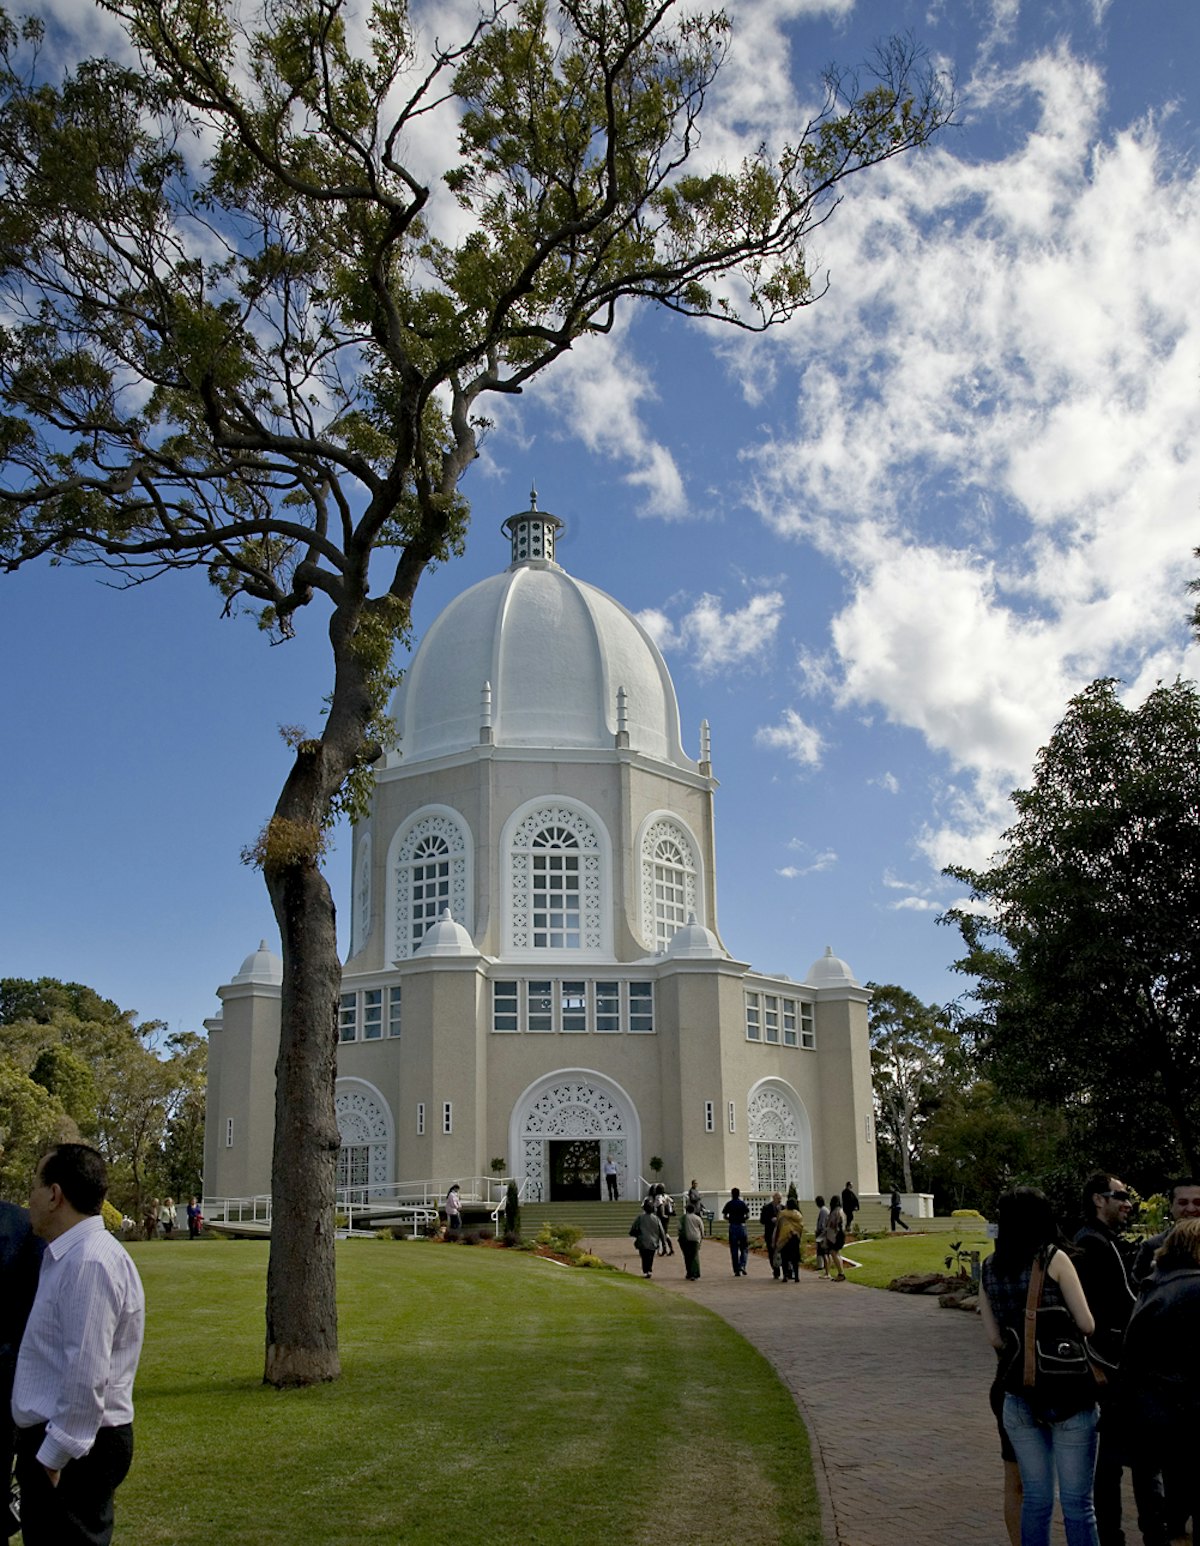 The reception to mark the anniversary was held on the grounds of the Baha'i House of Worship in Sydney, followed by a devotional program in the temple itself.